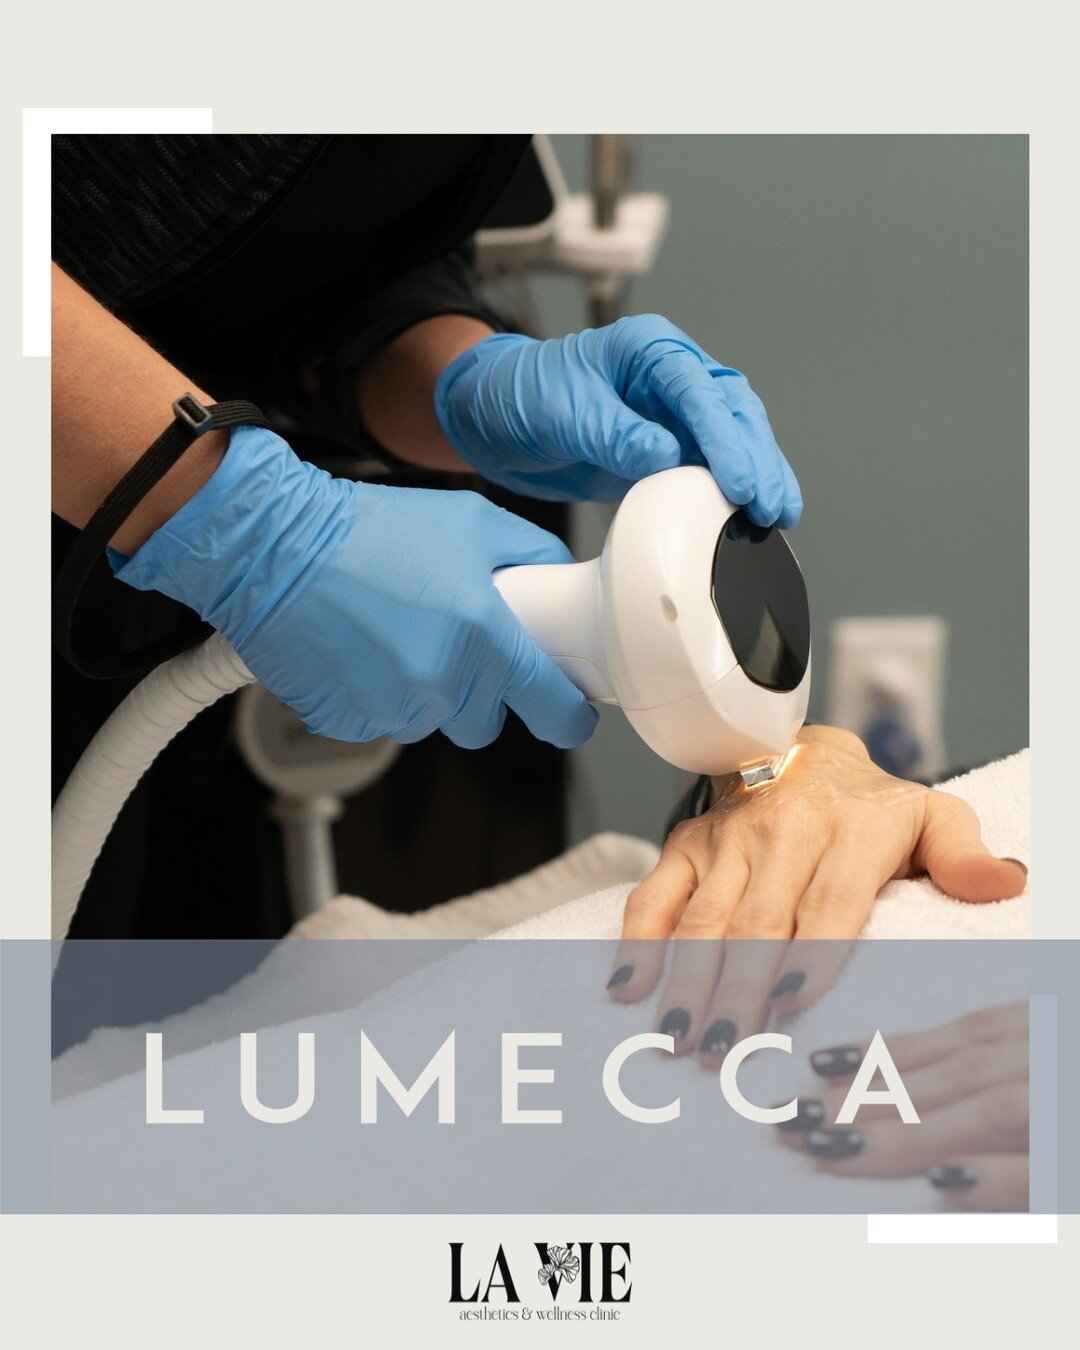 In just 1-3 sessions #Lumecca improves the appearance of:
 
 🌞Age spots (red/brown pigmentations)
 🌞Vascular lesions such as facial telangiectasias (spider veins)
 🌞Rosacea (redness)
 🌞Freckles
 🌞Sun damage
 
 Give us a call to learn more! 😊😊
